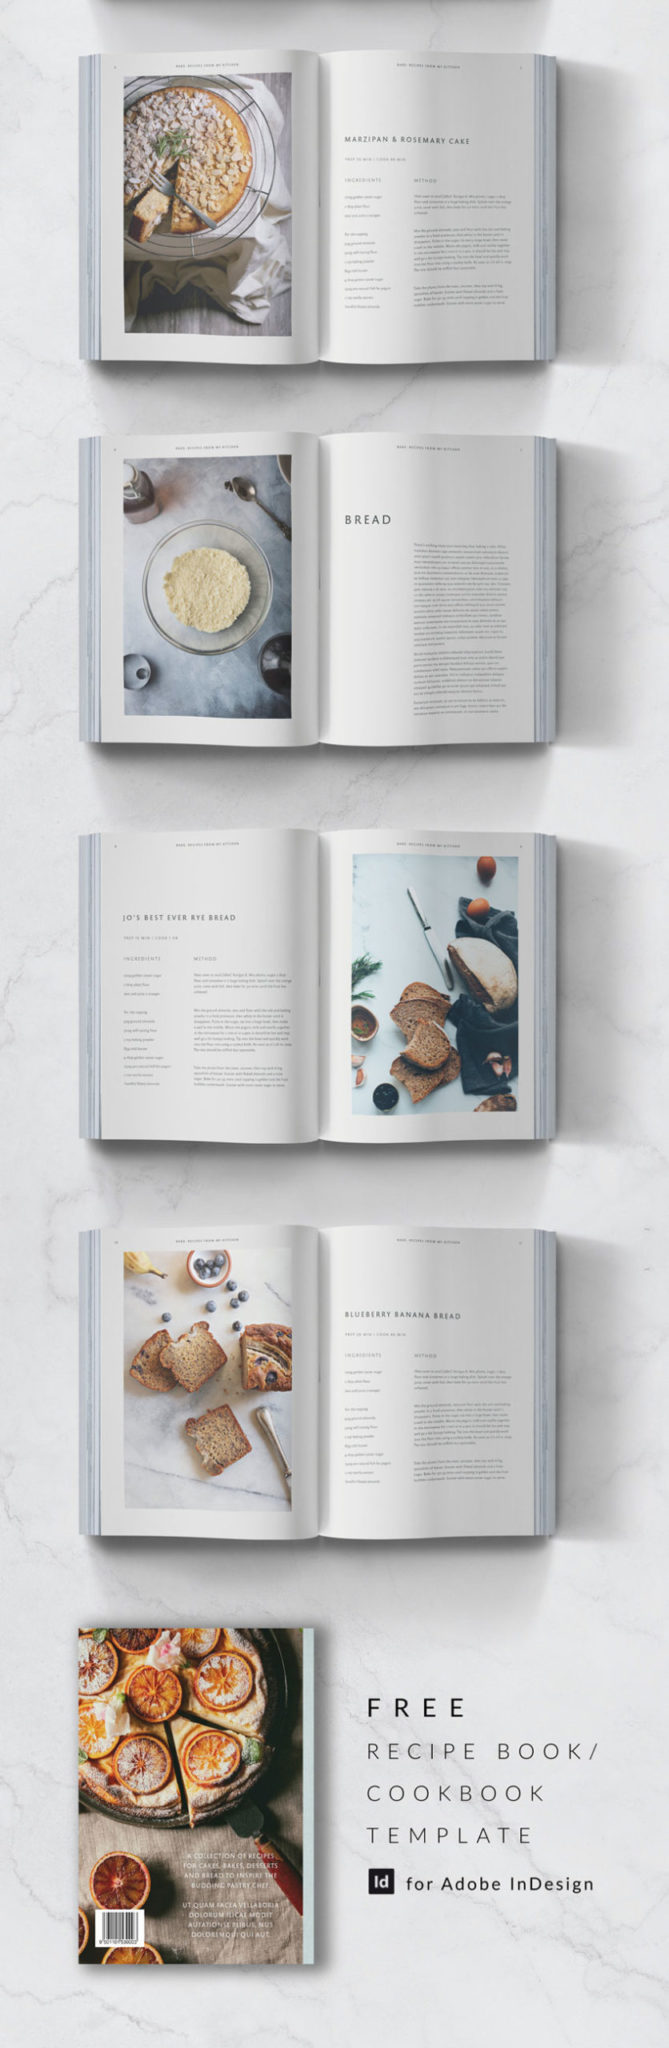 free indesign template free recipe book template free cookbook template free cookery book template for indesign